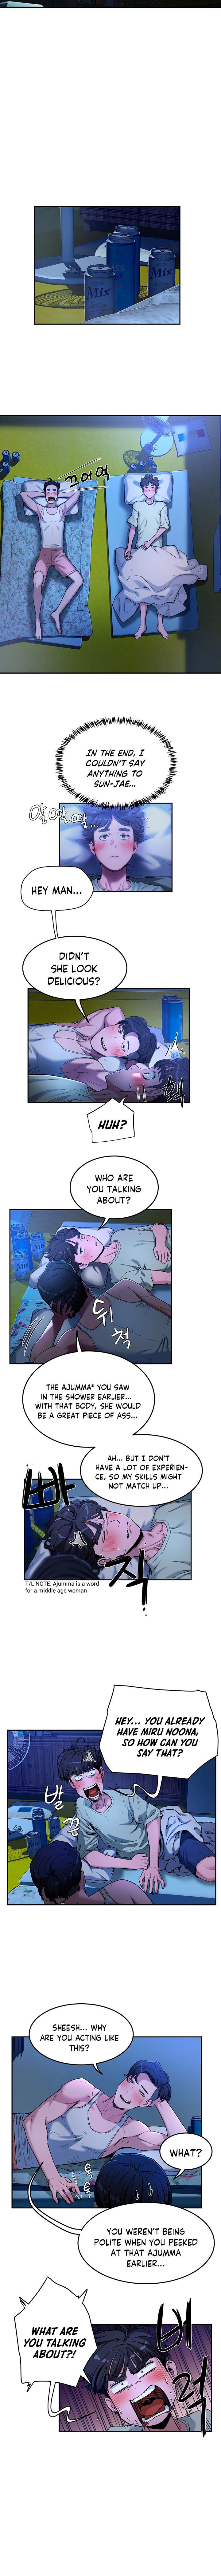 In The Summer - Chapter 3 Page 8